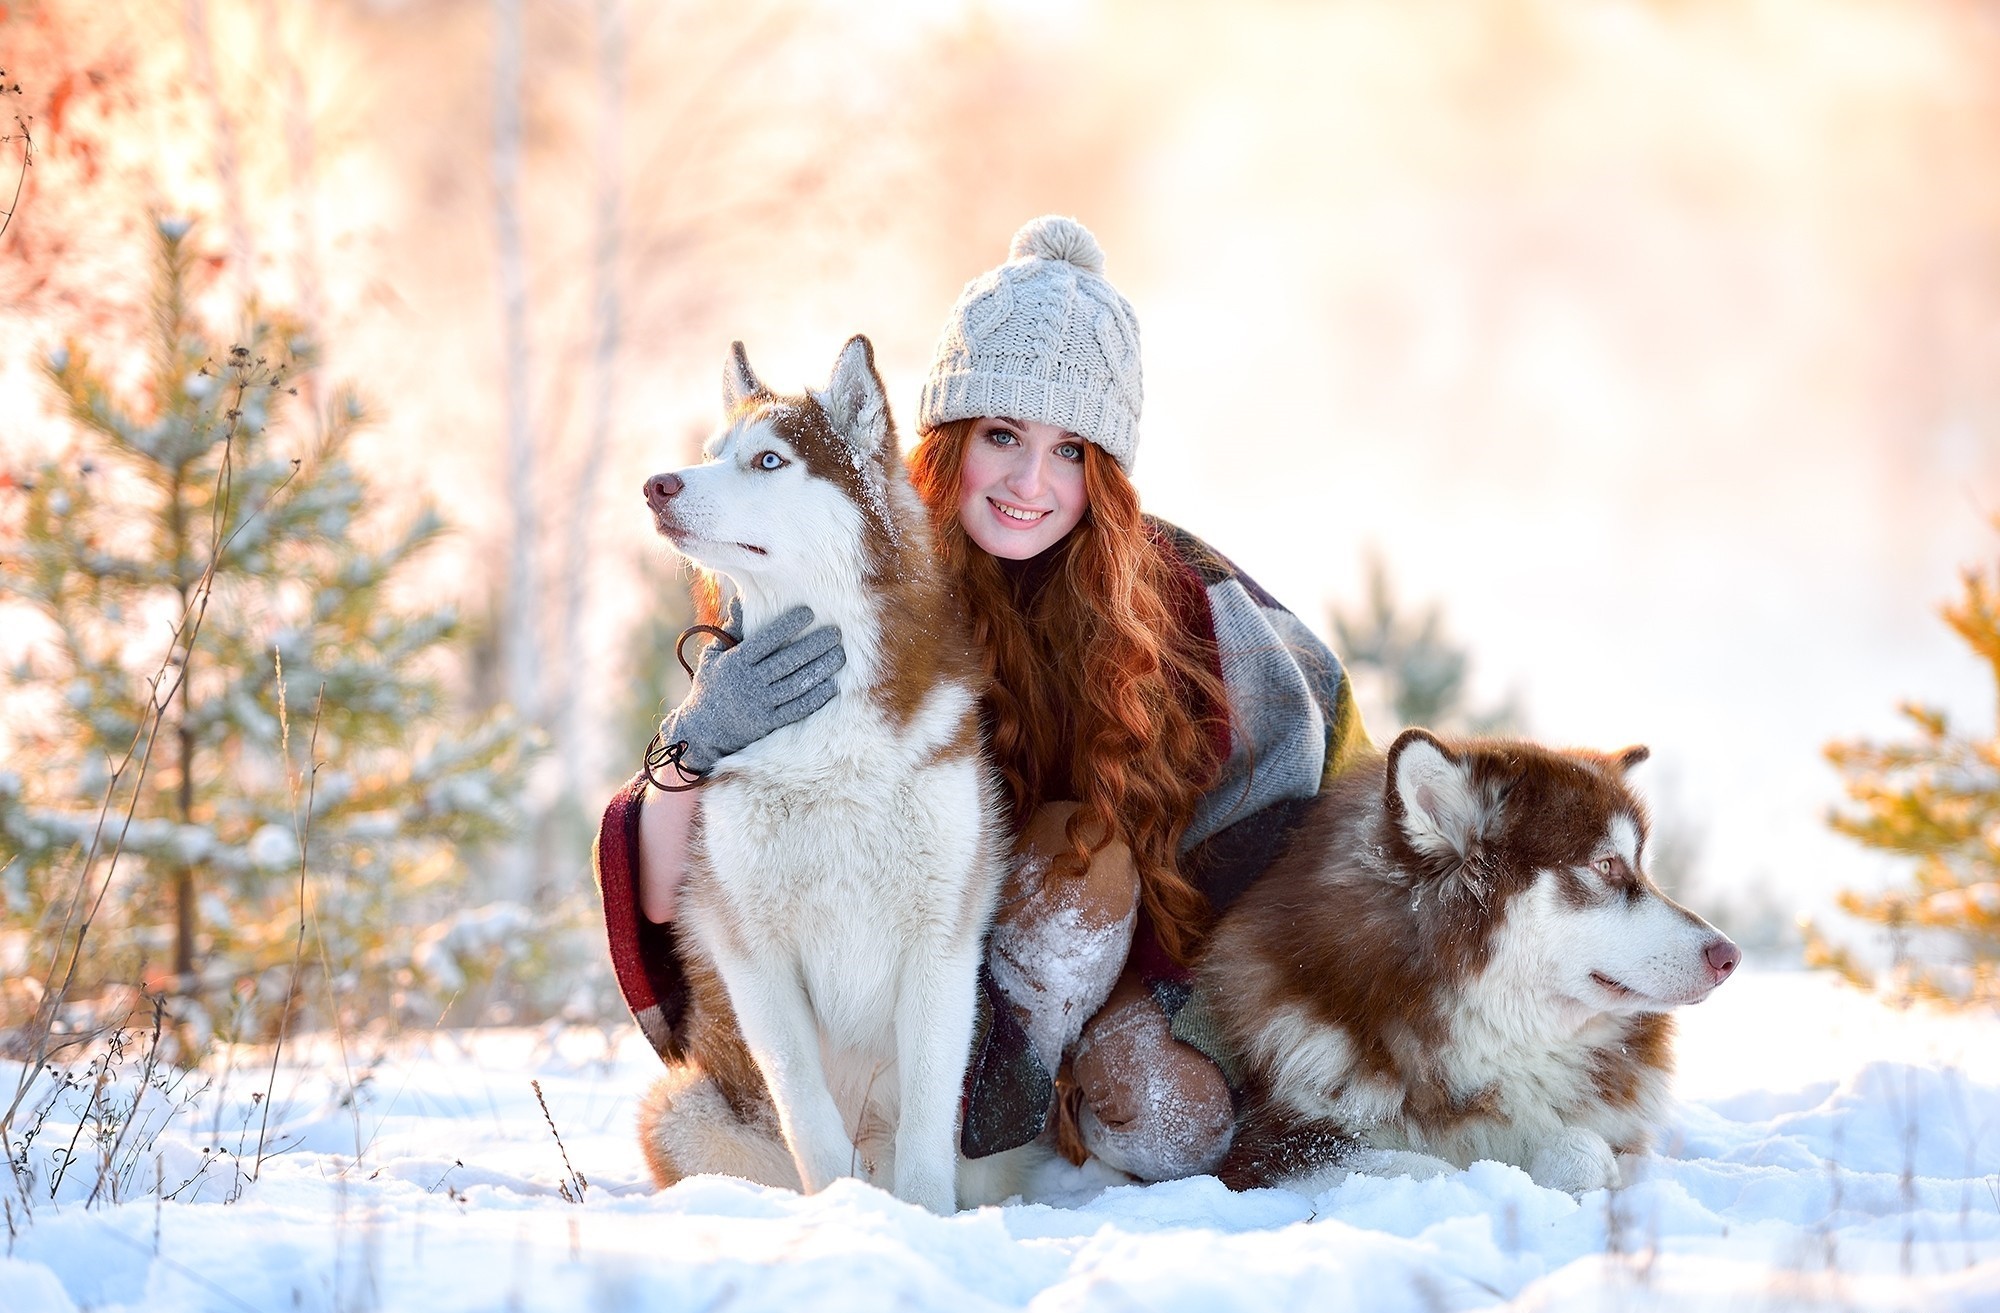 People 2000x1313 winter dog model animals women wool cap women with dogs snow redhead white cap mammals woolly hat women outdoors outdoors long hair cold